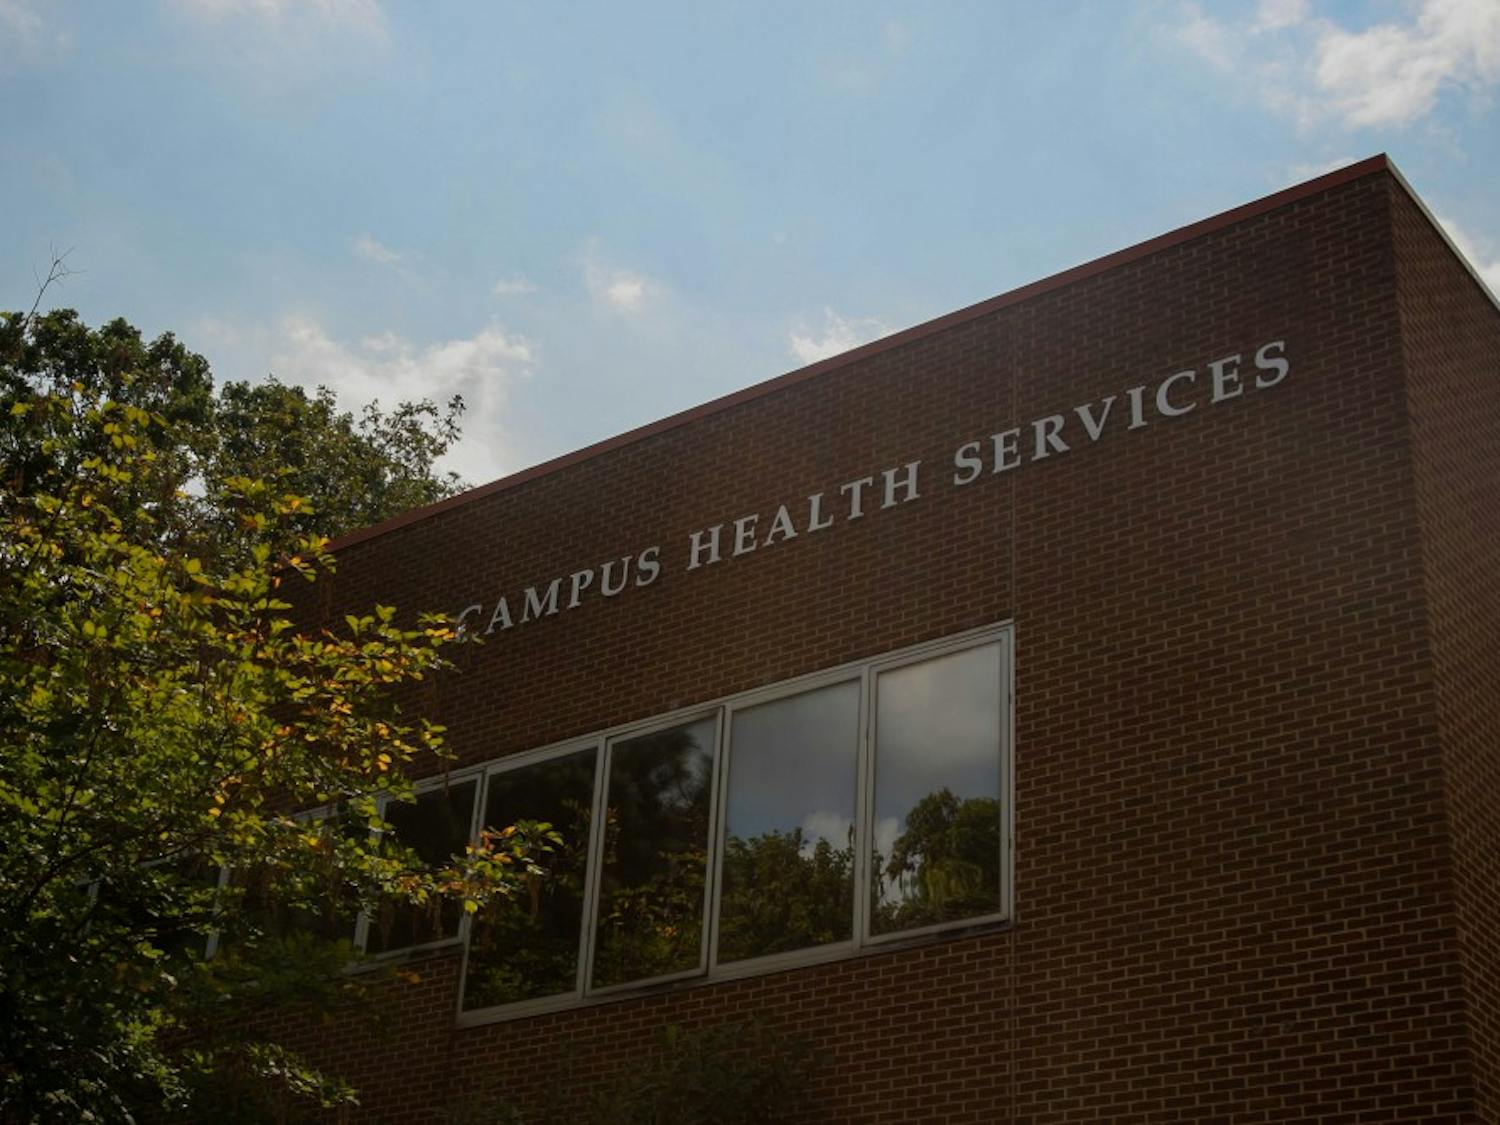 Campus Health Services, located in the James A. Taylor building, offers a variety of medical services including nutrition, pharmacy, radiology, counseling and psychological services and other wellness care. 